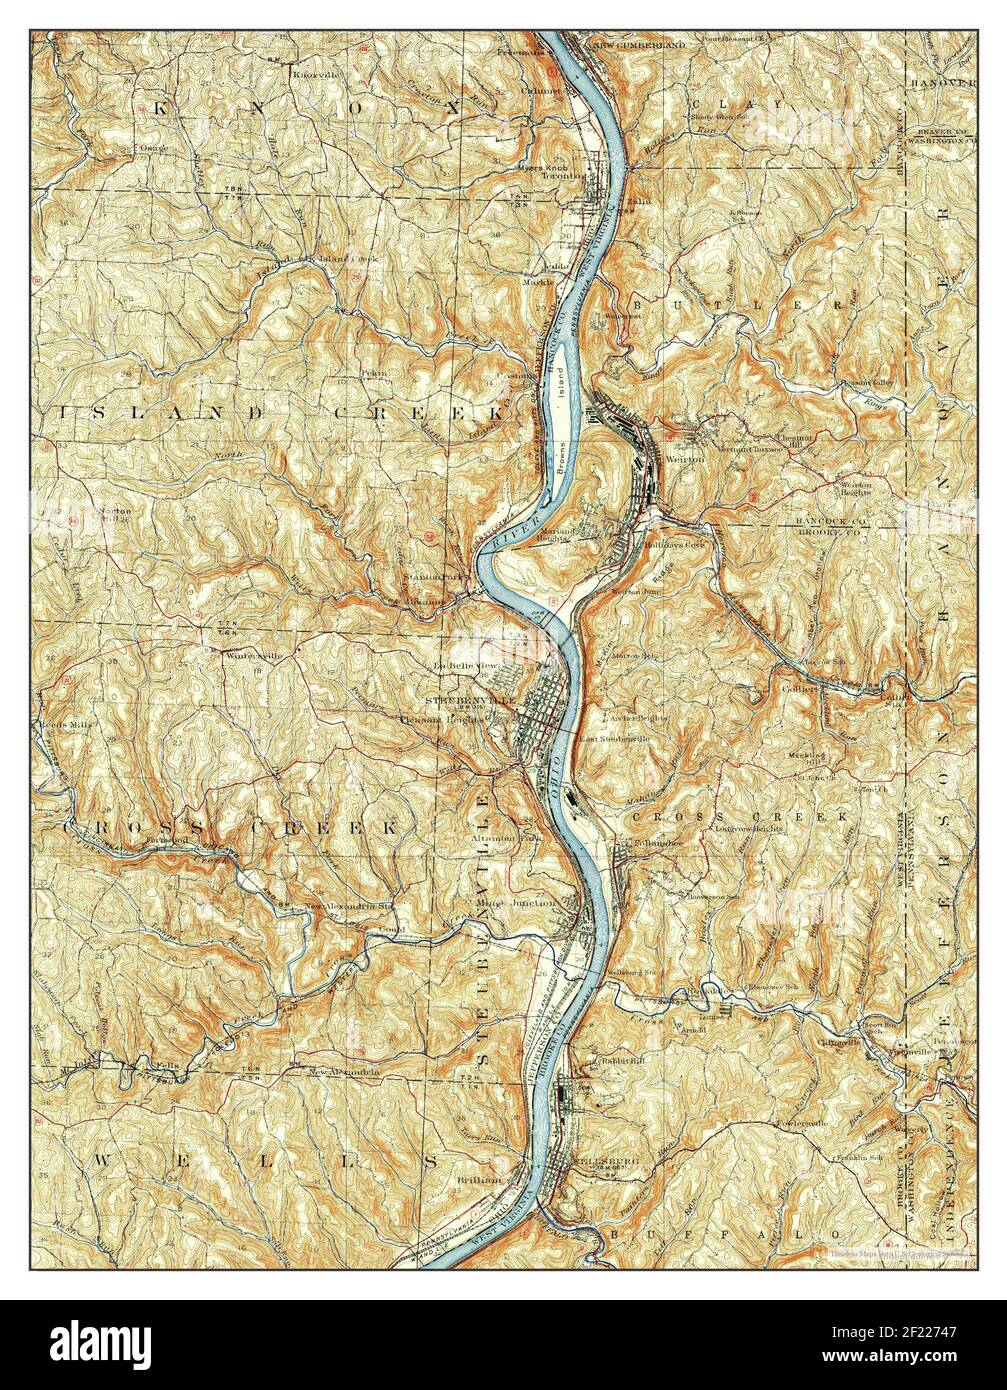 Steubenville, West Virginia, map 1935, 1:62500, United States of America by Timeless Maps, data U.S. Geological Survey Stock Photo